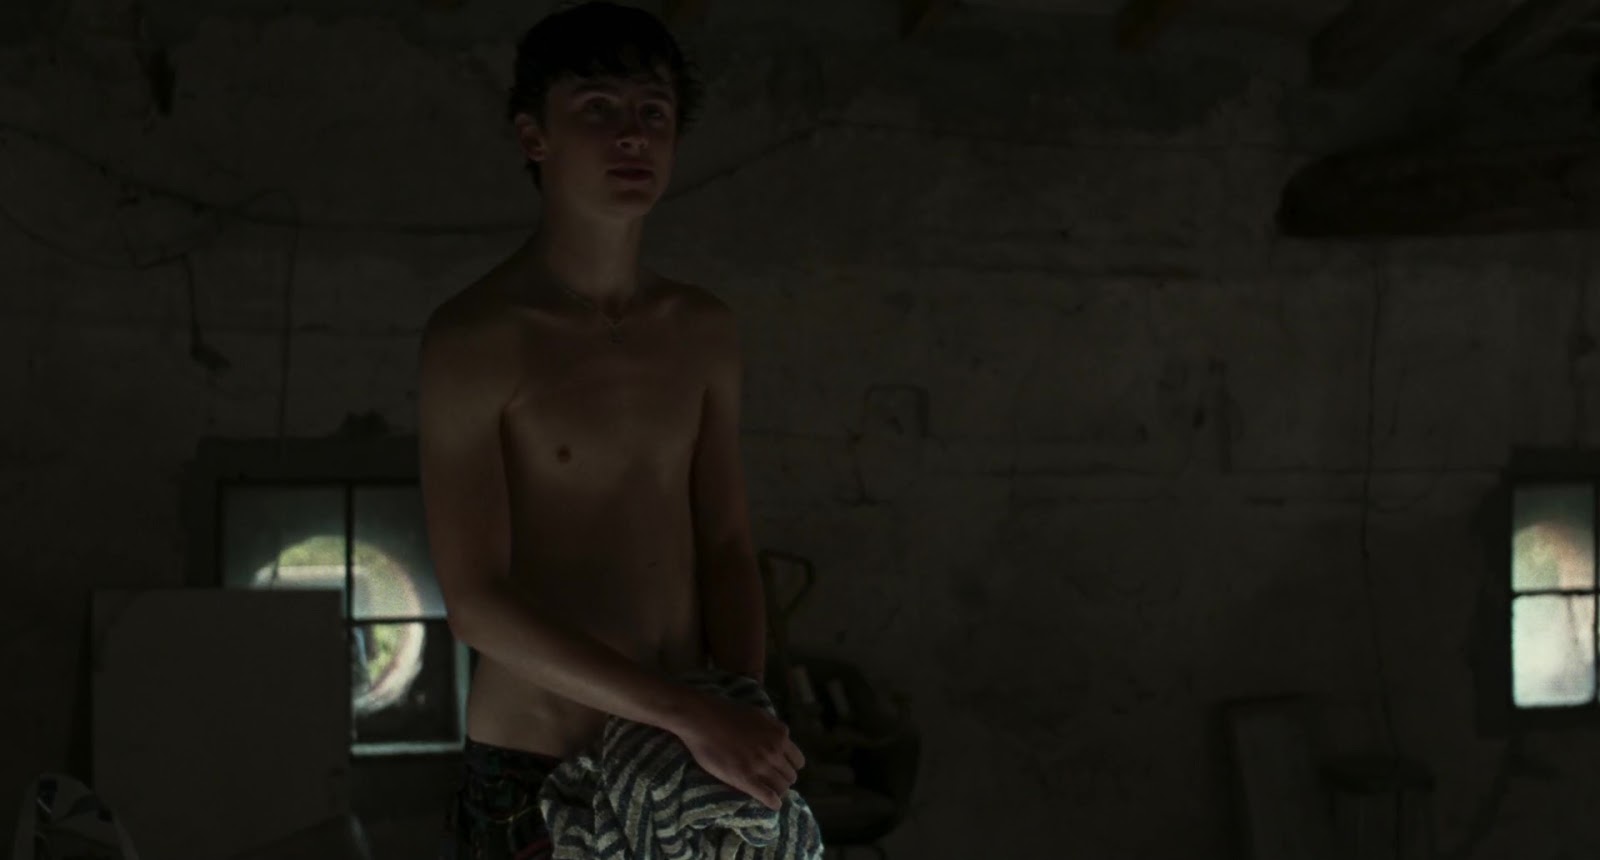 Timothée Chalamet shirtless in Call Me By Your Name.